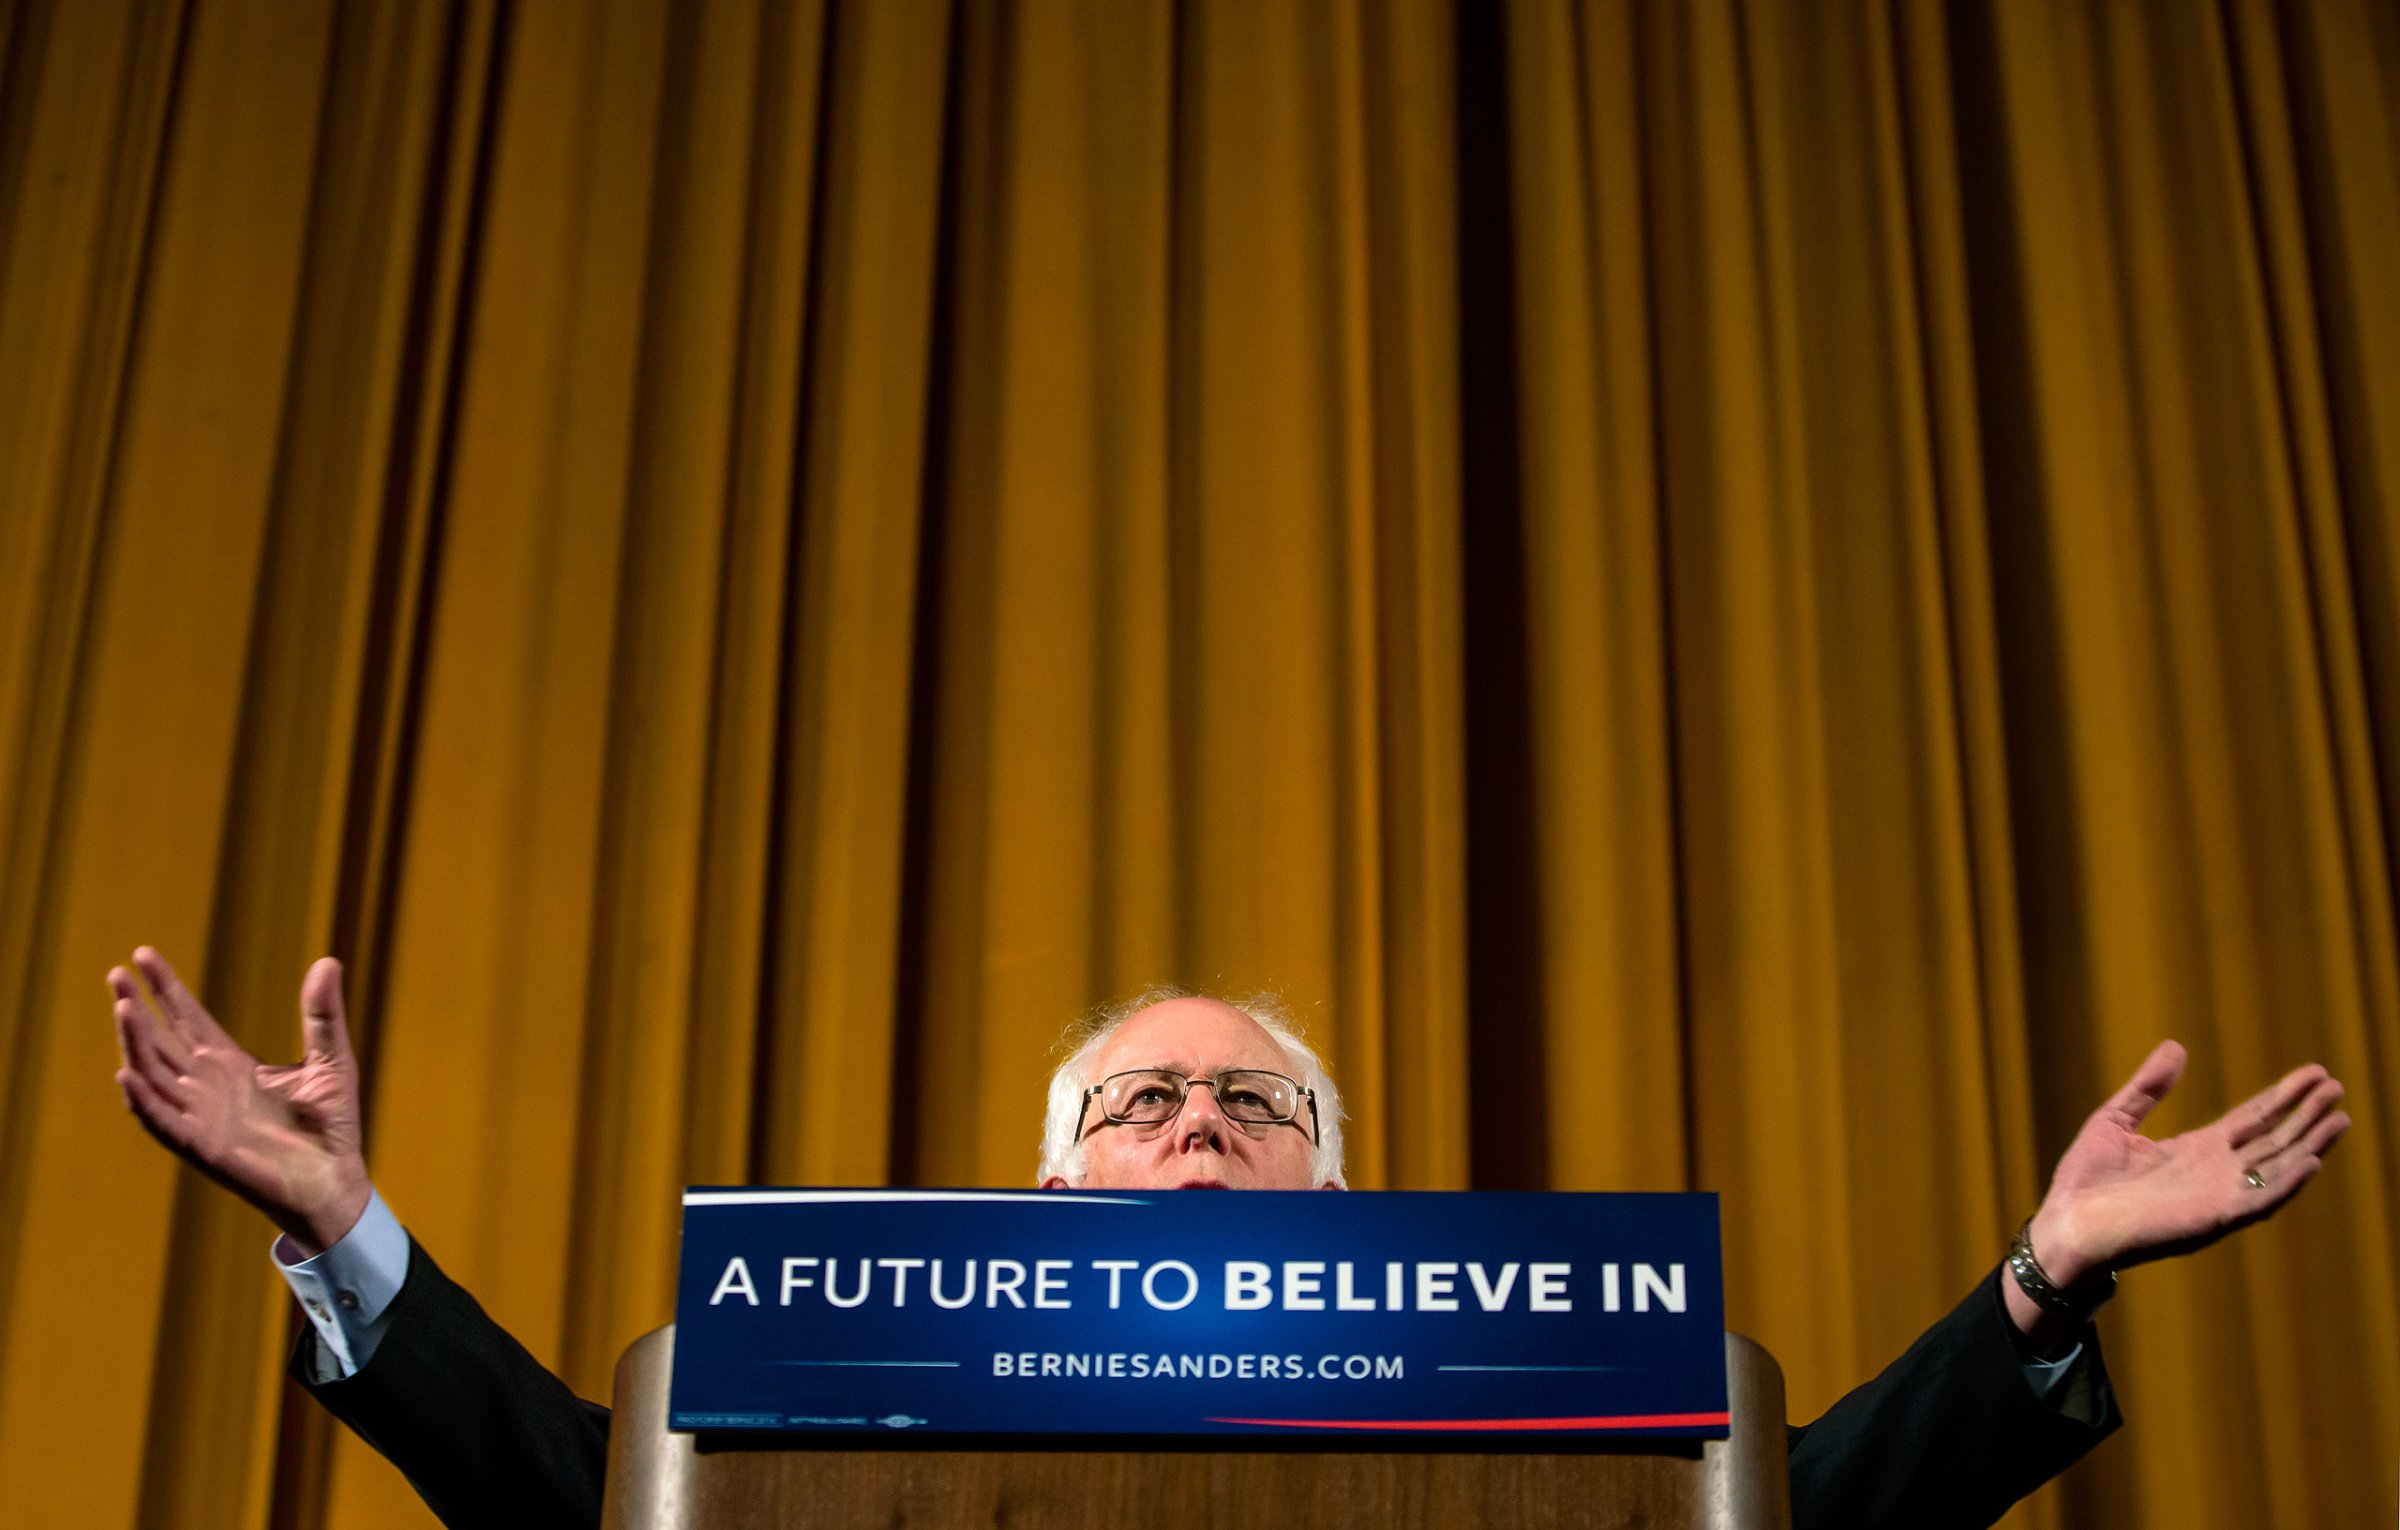 Sanders has been skeptical about the benefits of free trade